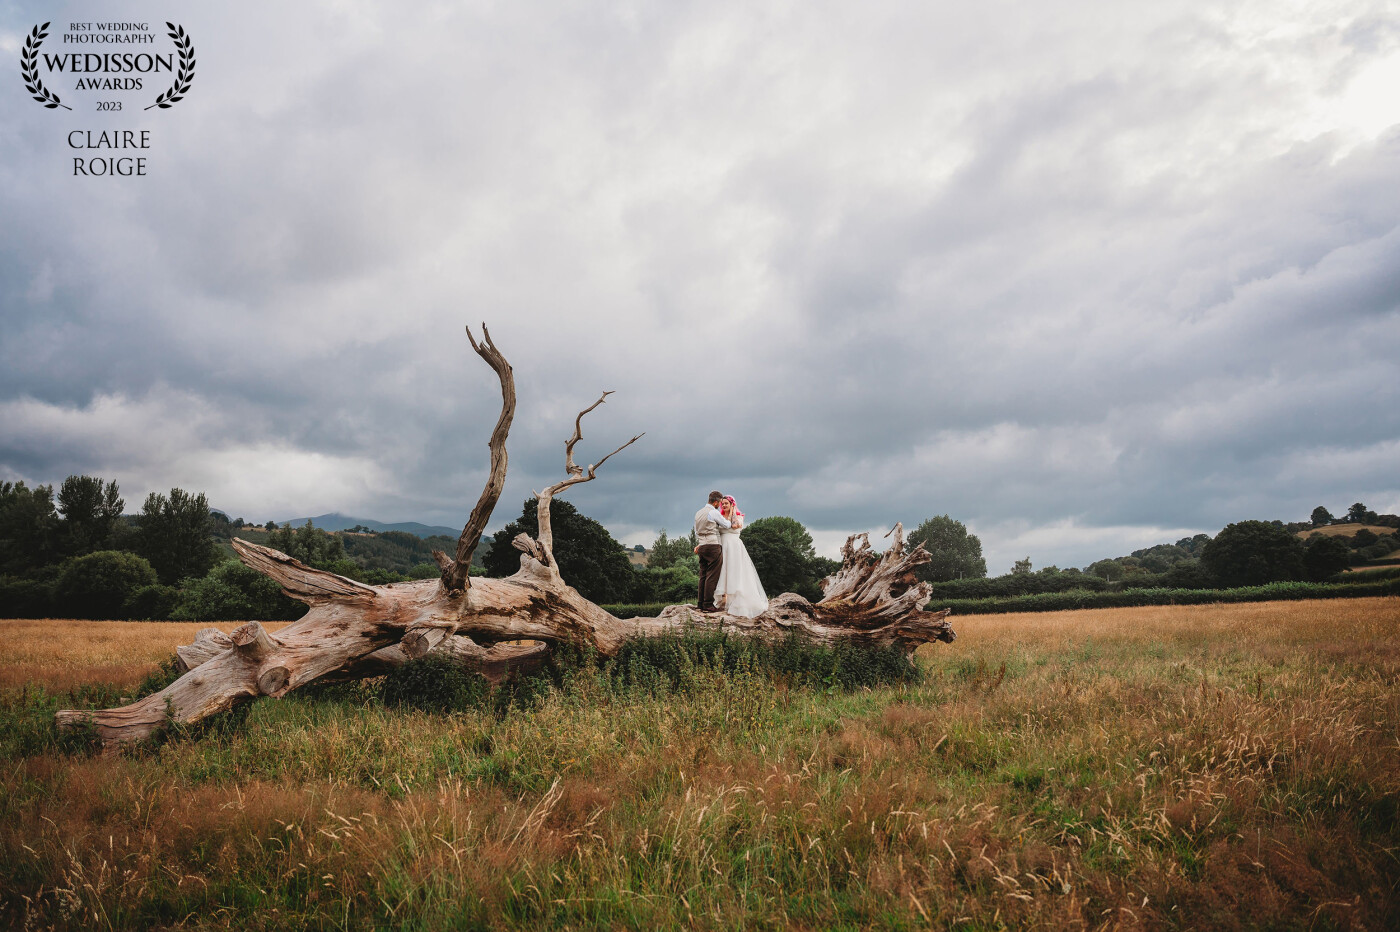 We set off to do our couples photos away from the wedding guest when the bride mentioned seeing a strange looking tree during their venue visit. We went hunting round a few fields till we found the famous tree! Bride and Groom were happy to partake in a bit of climbing for this shot.